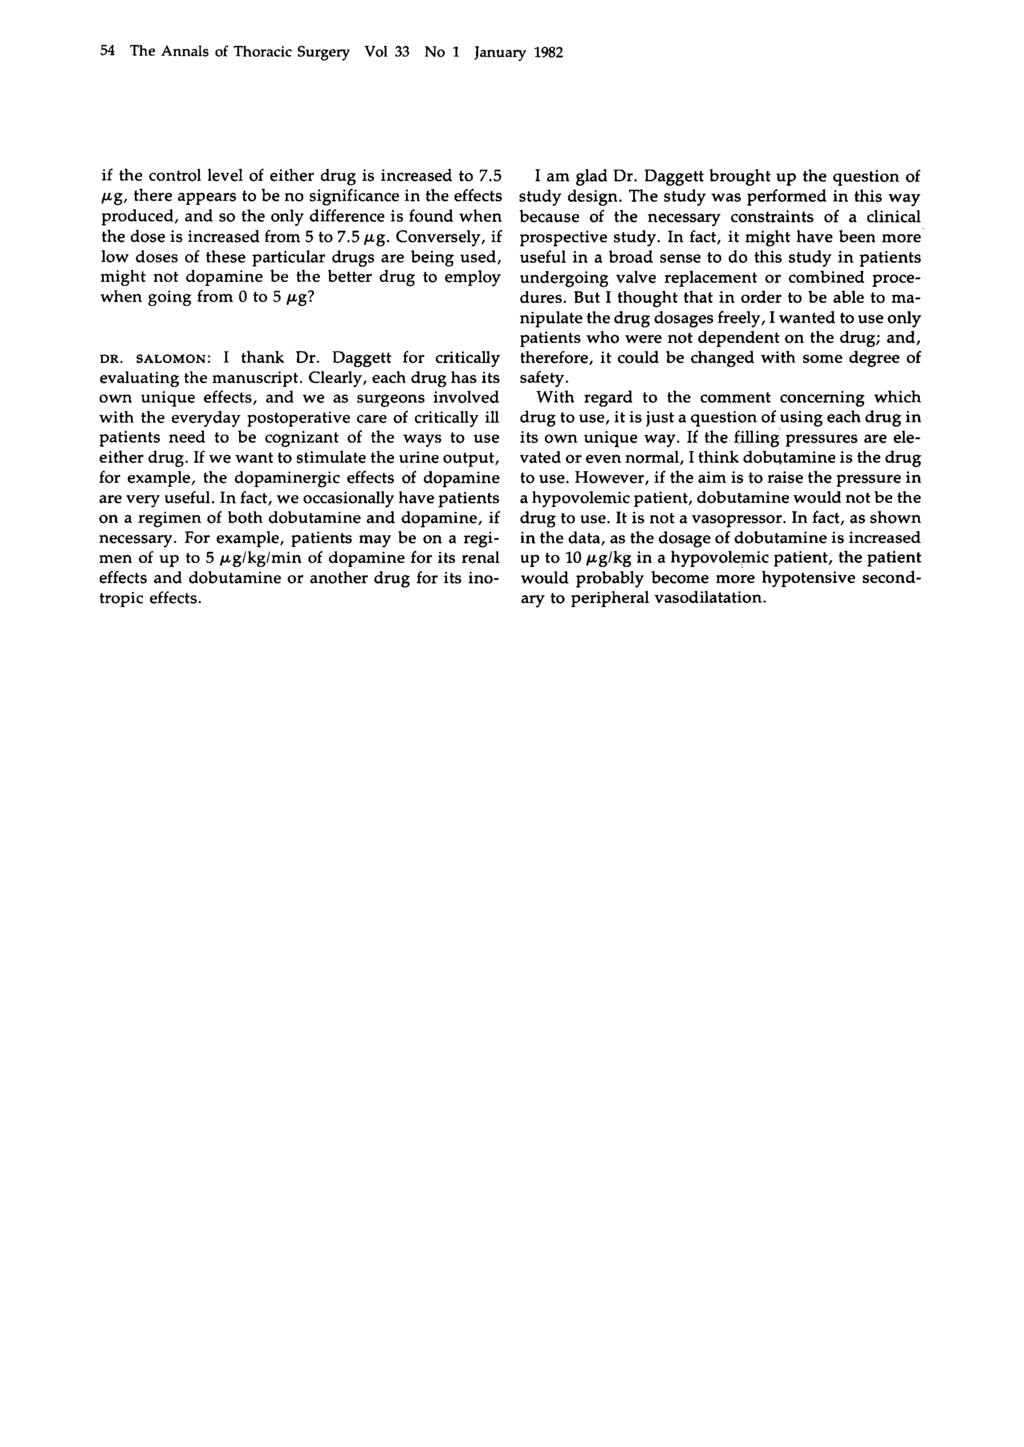 54 The Annals of Thoracic Surgery Vol 33 No 1 January 1982 if the control level of either drug is increased to 7.